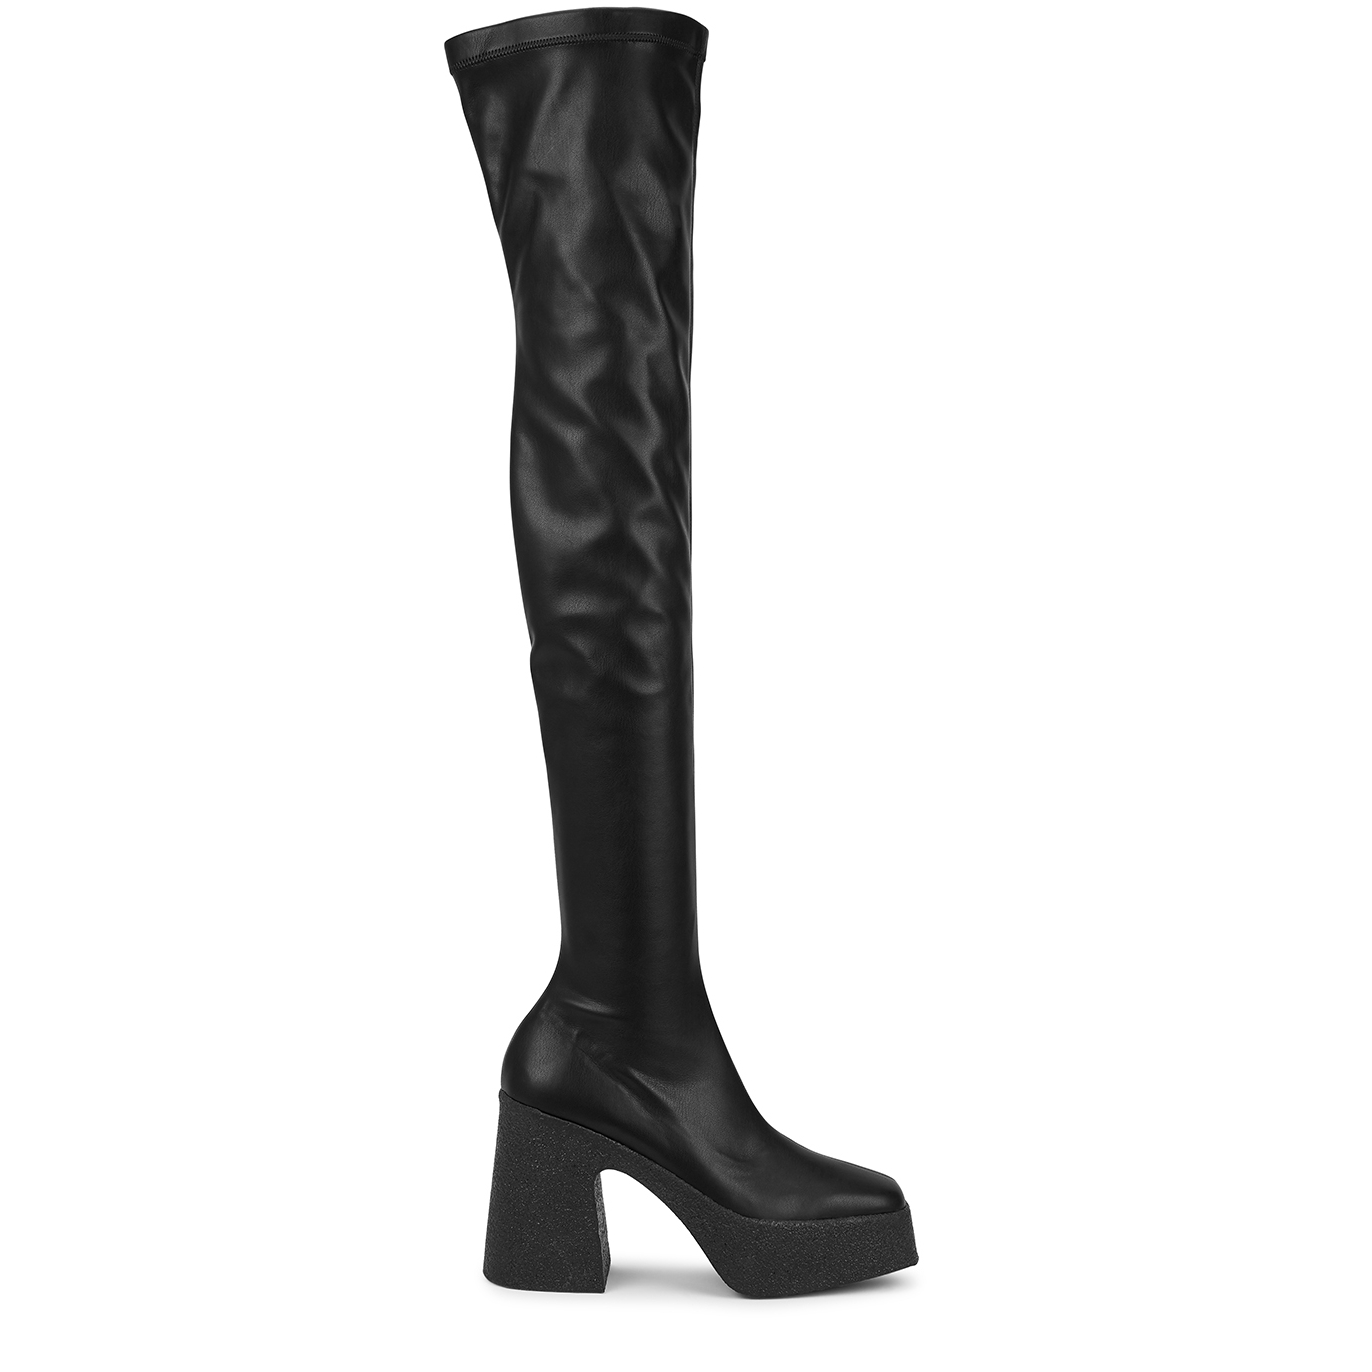 Stella McCartney Skyla Black Faux Leather Over-the-knee Boots - 5